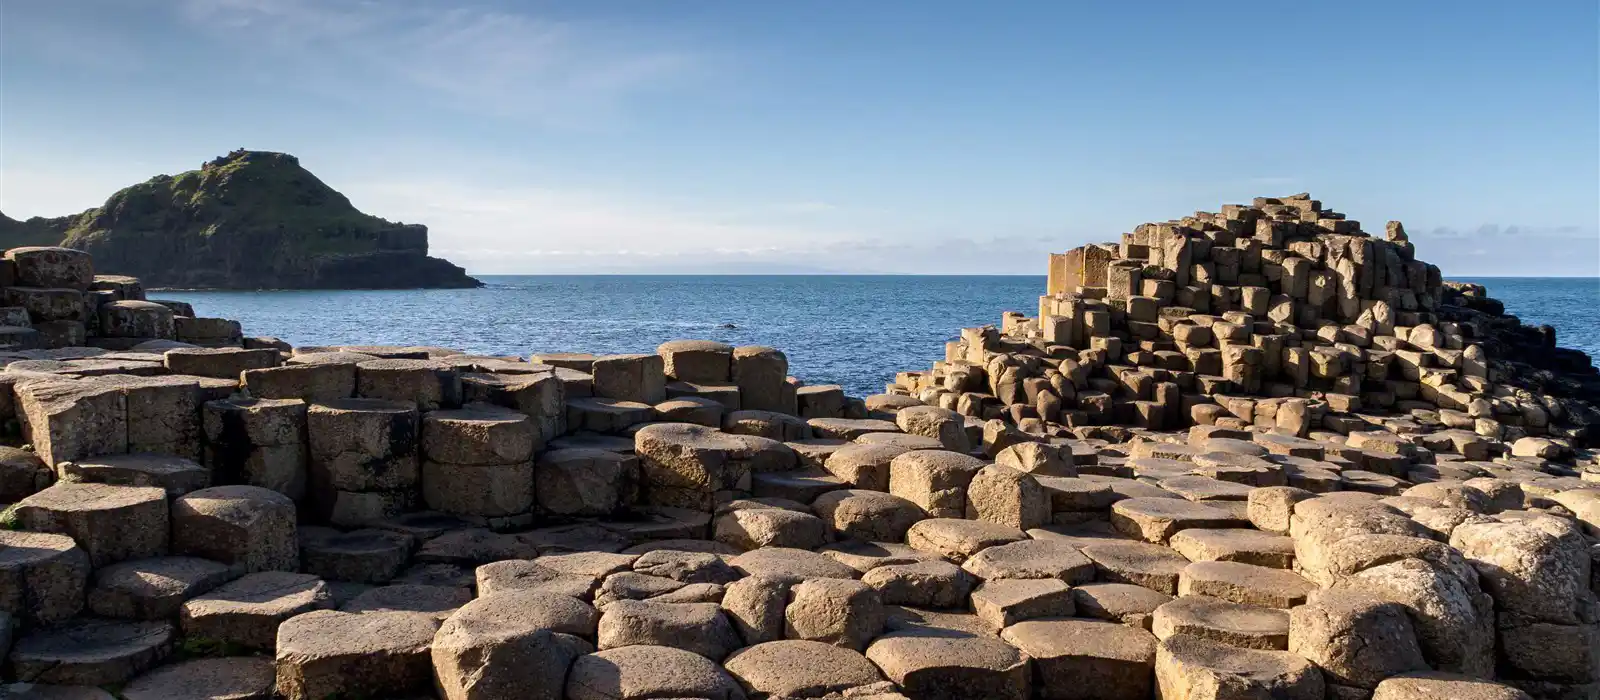 The National Trust site of Giant's Causeway in Northern Ireland